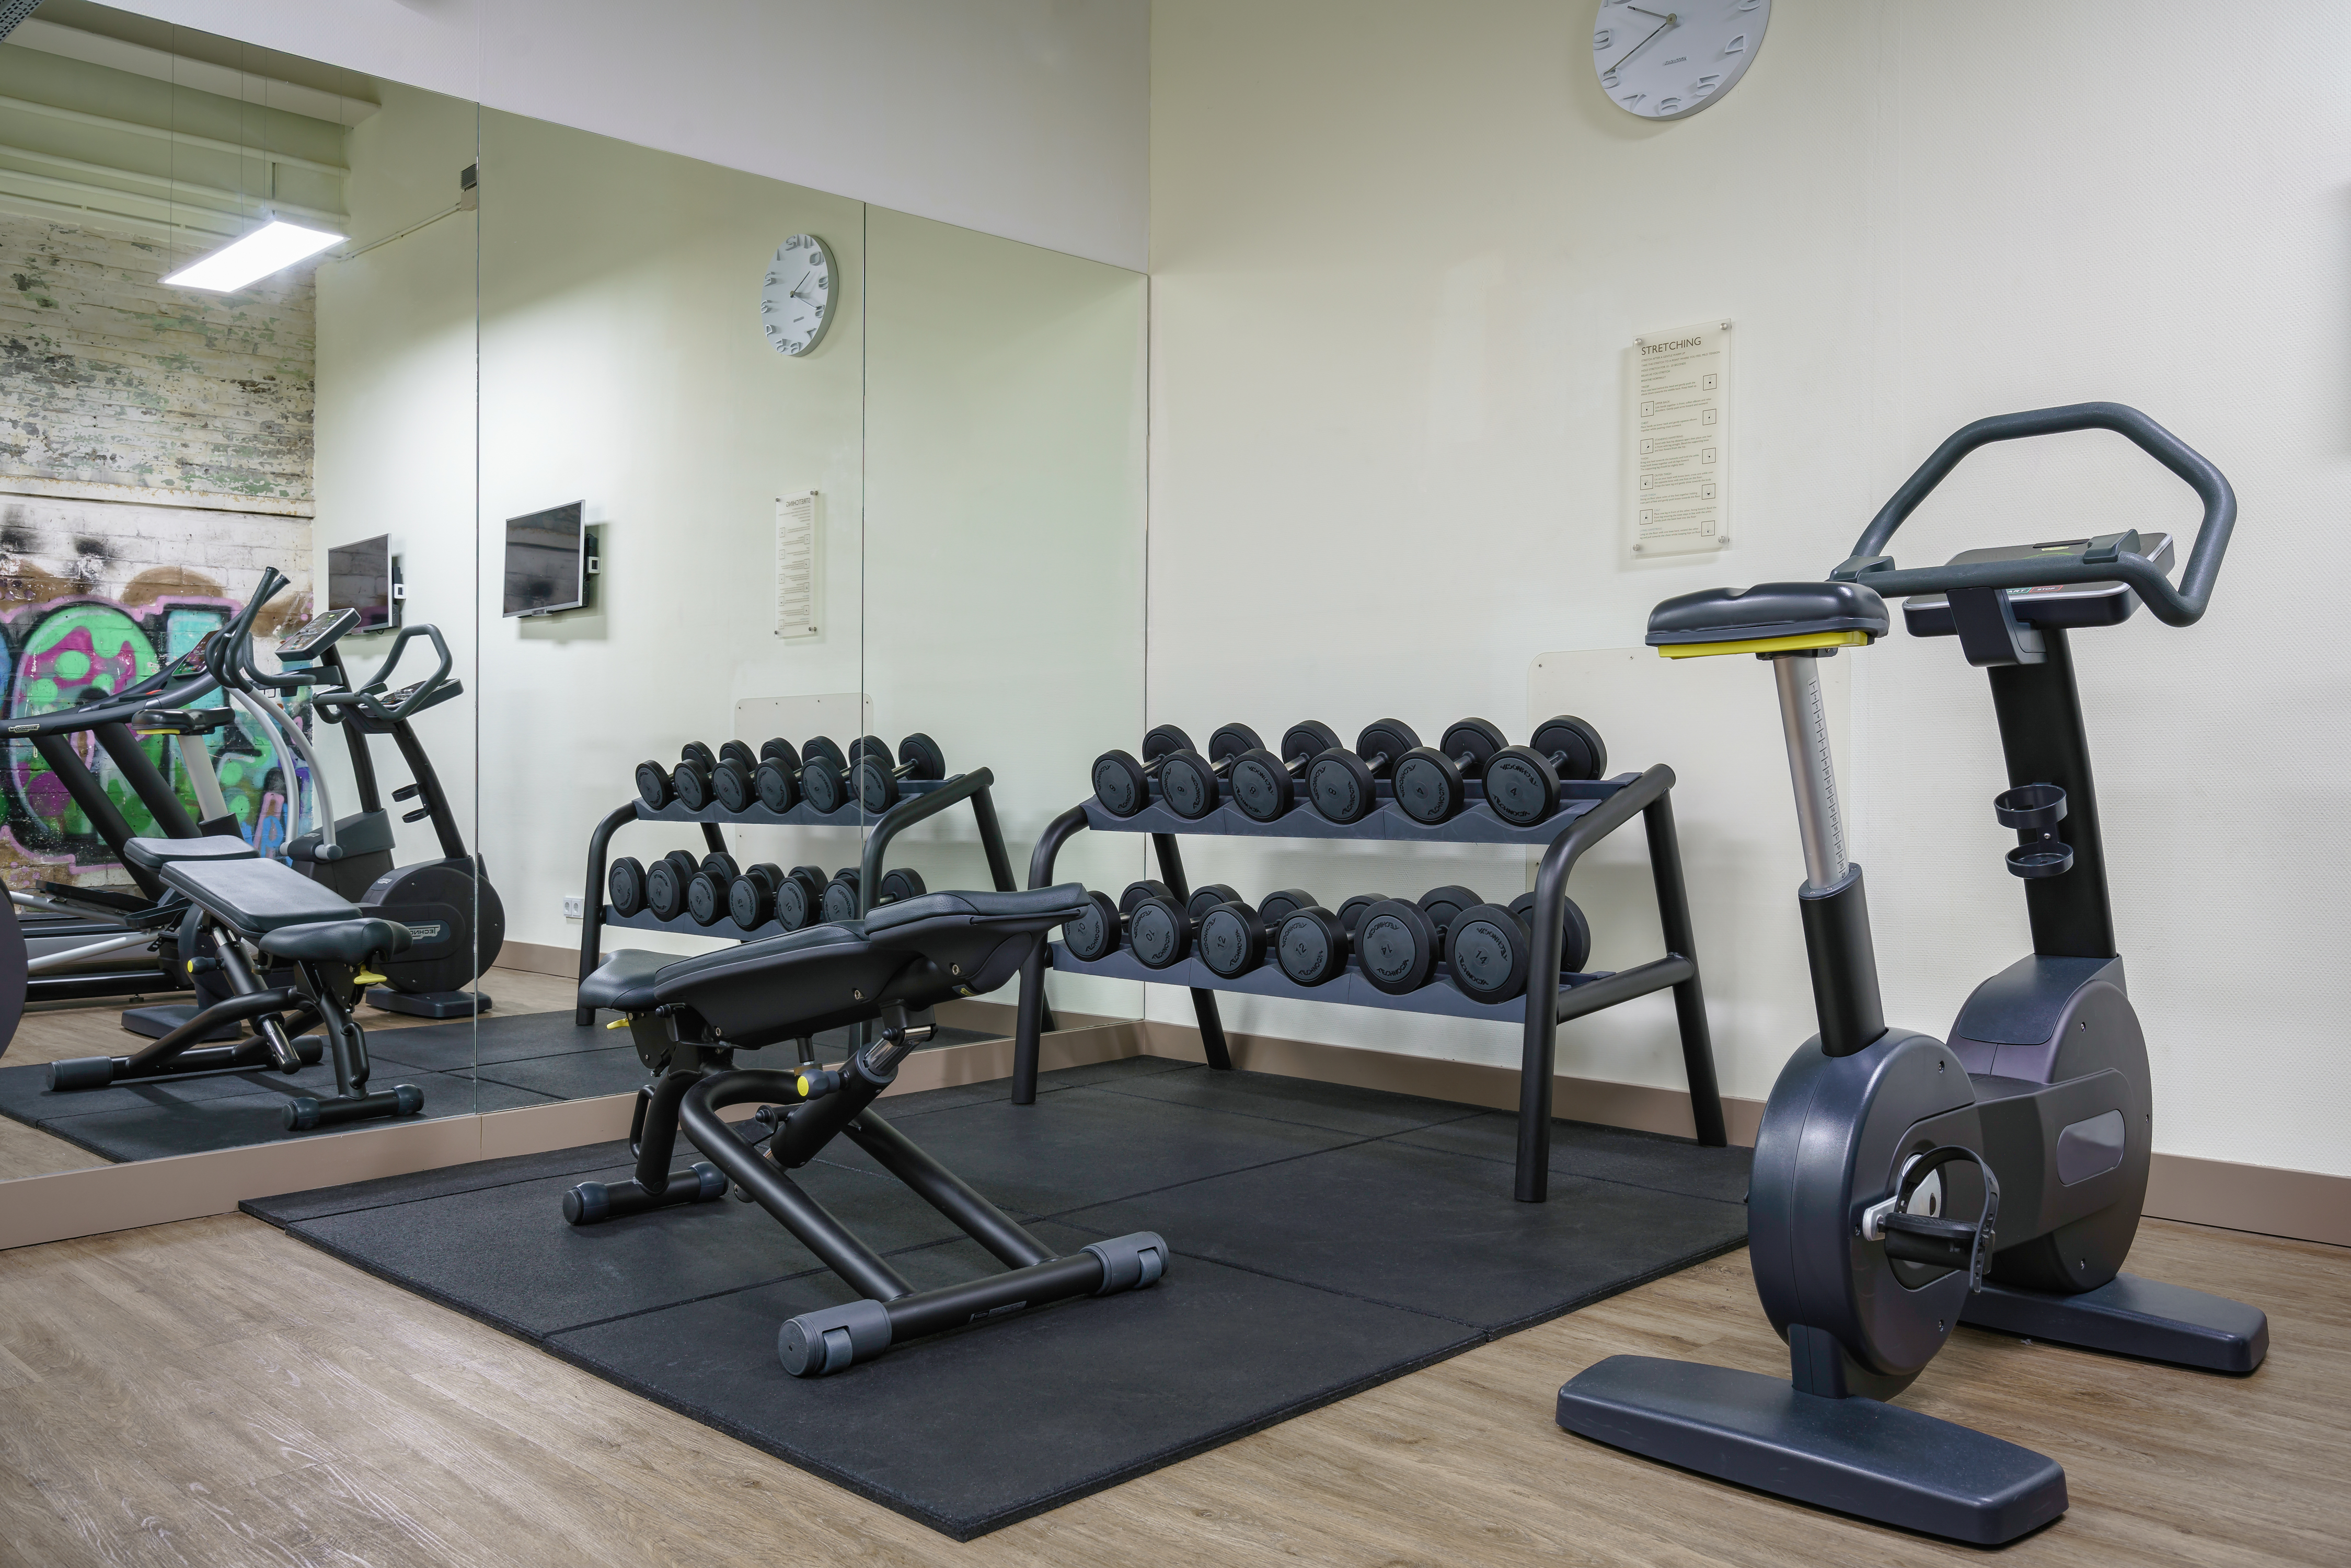 Weight and Other Exercise Equipment in Fitness Center